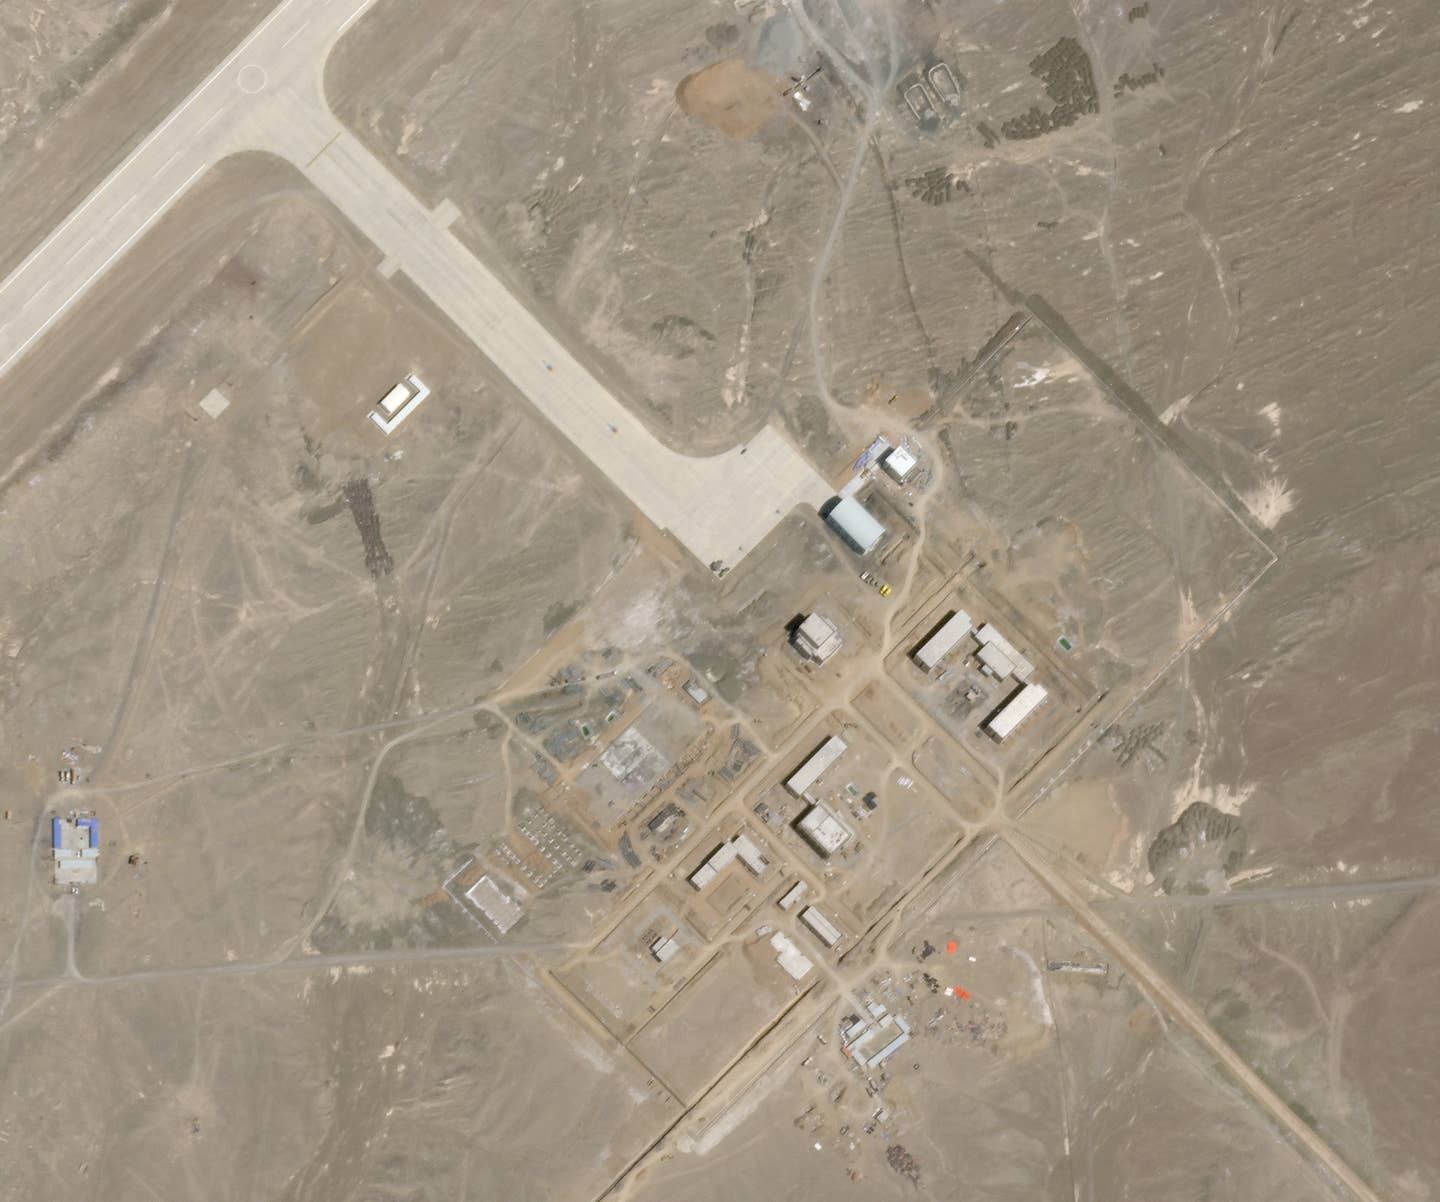 A look at the new facilities built and/or being built near the main apron at the air base near Lop Nor on August 3, 2022. <em>PHOTO © 2022 PLANET LABS INC. ALL RIGHTS RESERVED. REPRINTED BY PERMISSION</em>